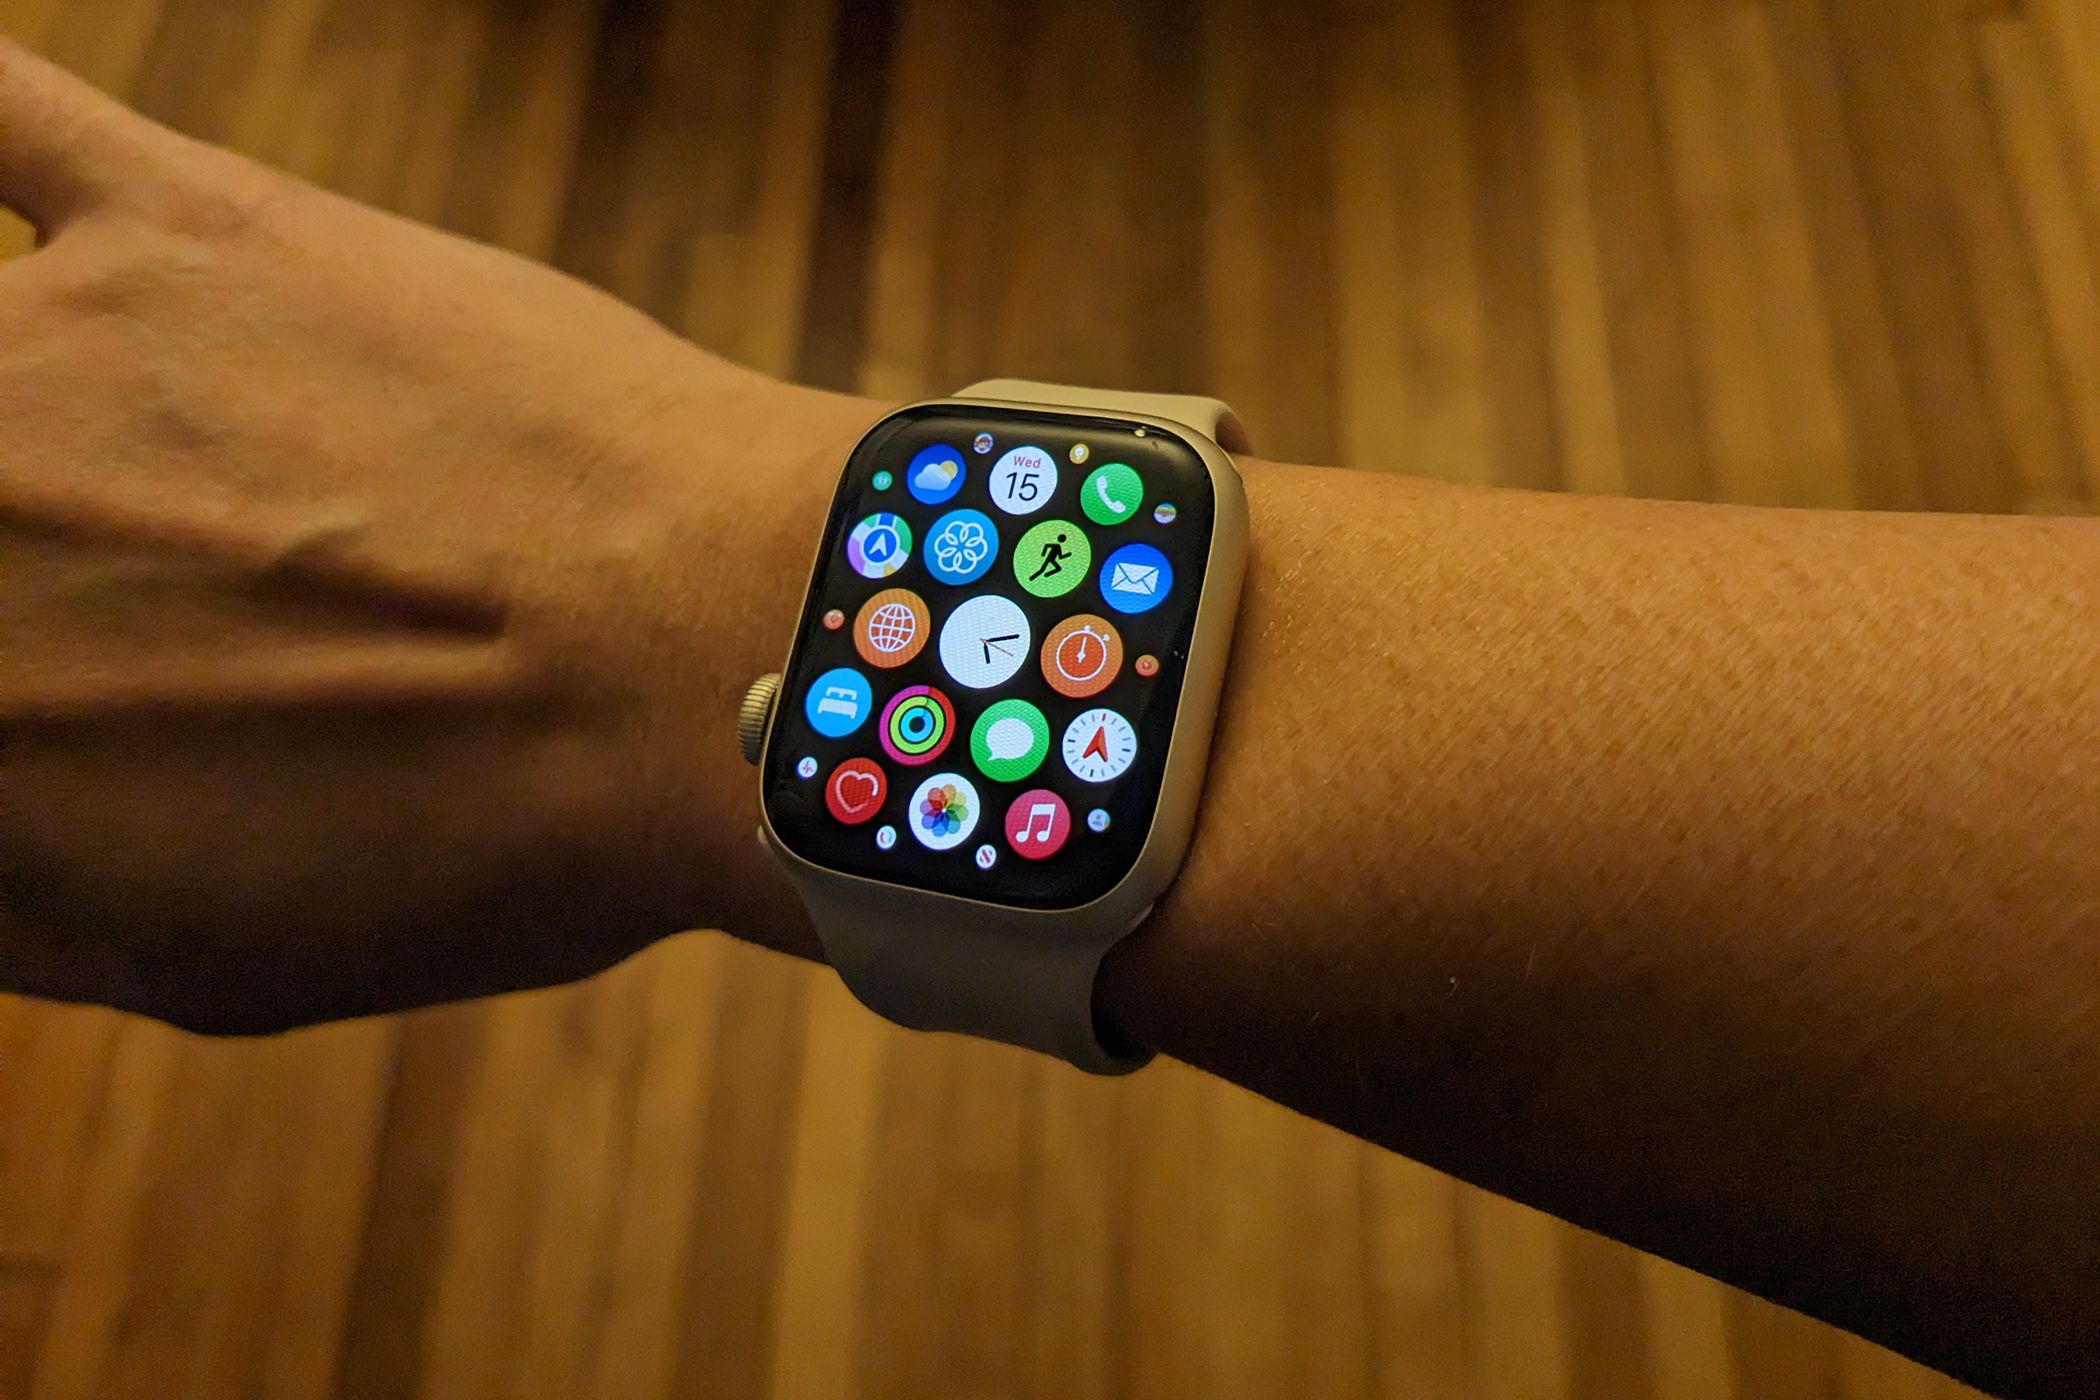 How to add apps to Apple Watch